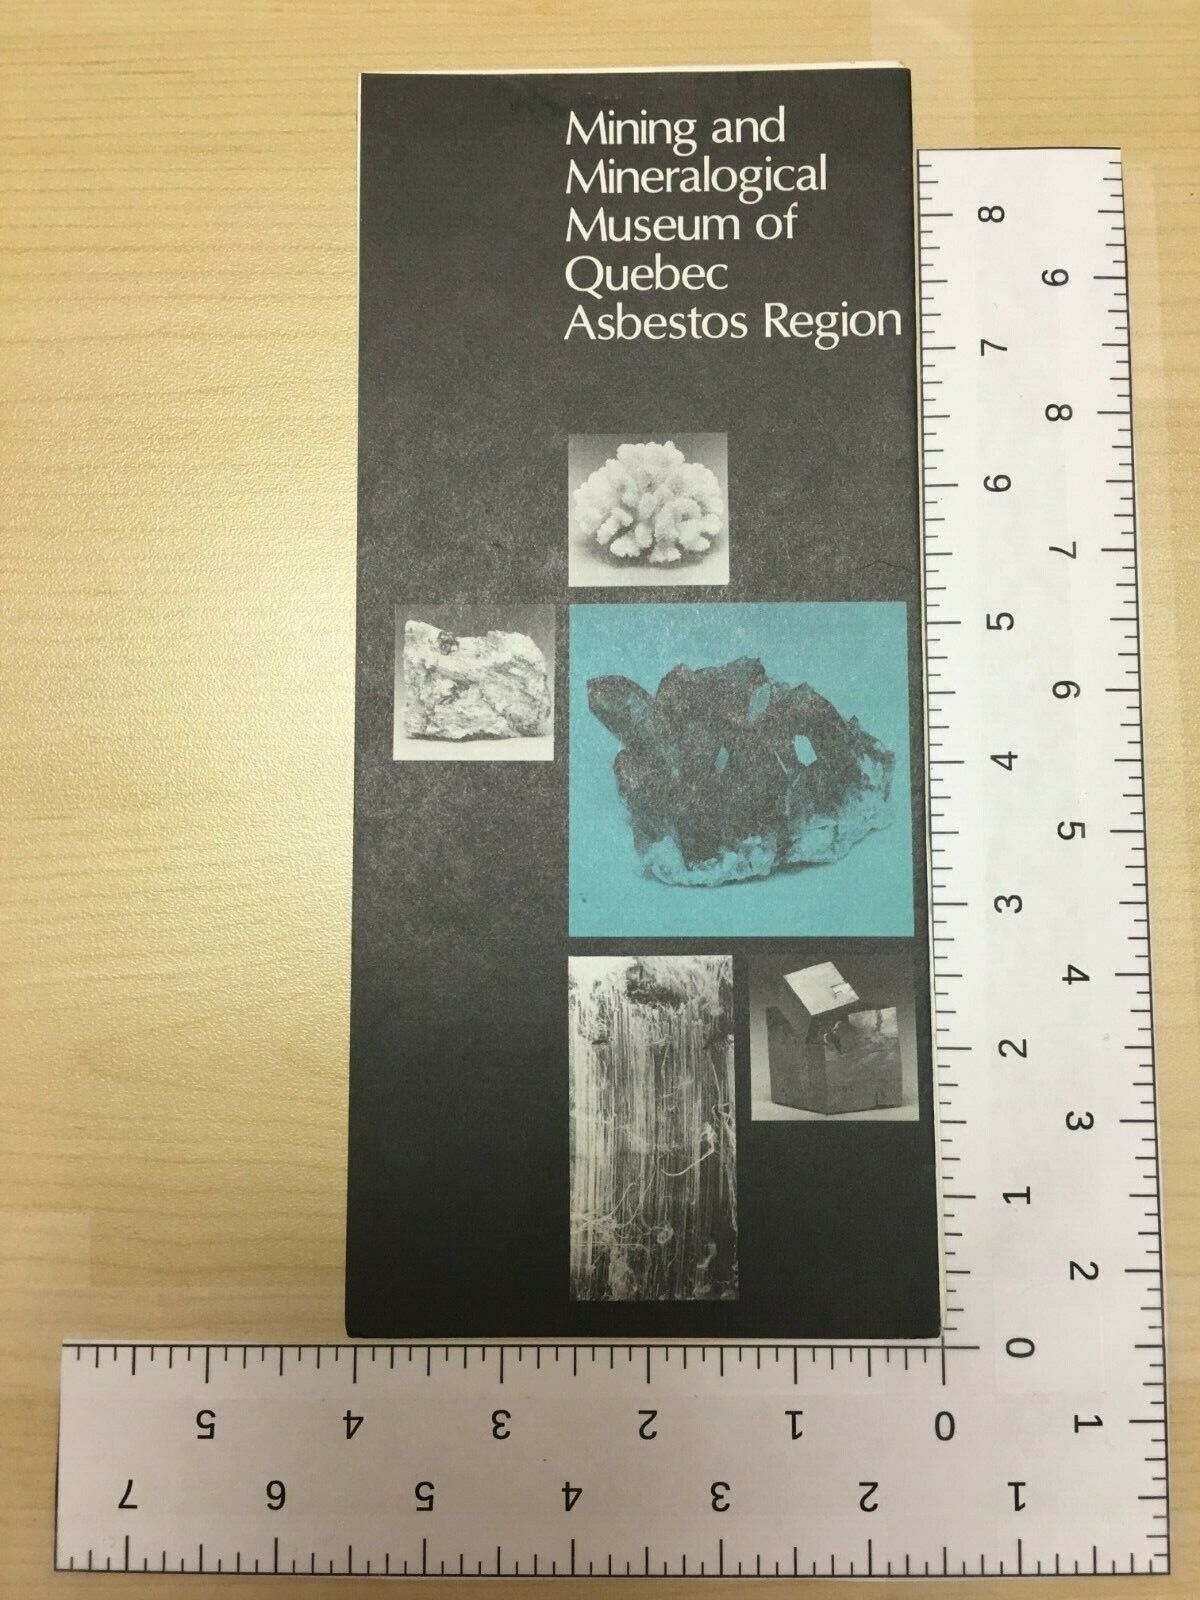 Vintage Brochure Mining and Mineralogical Museum of Quebec Asbestos Region